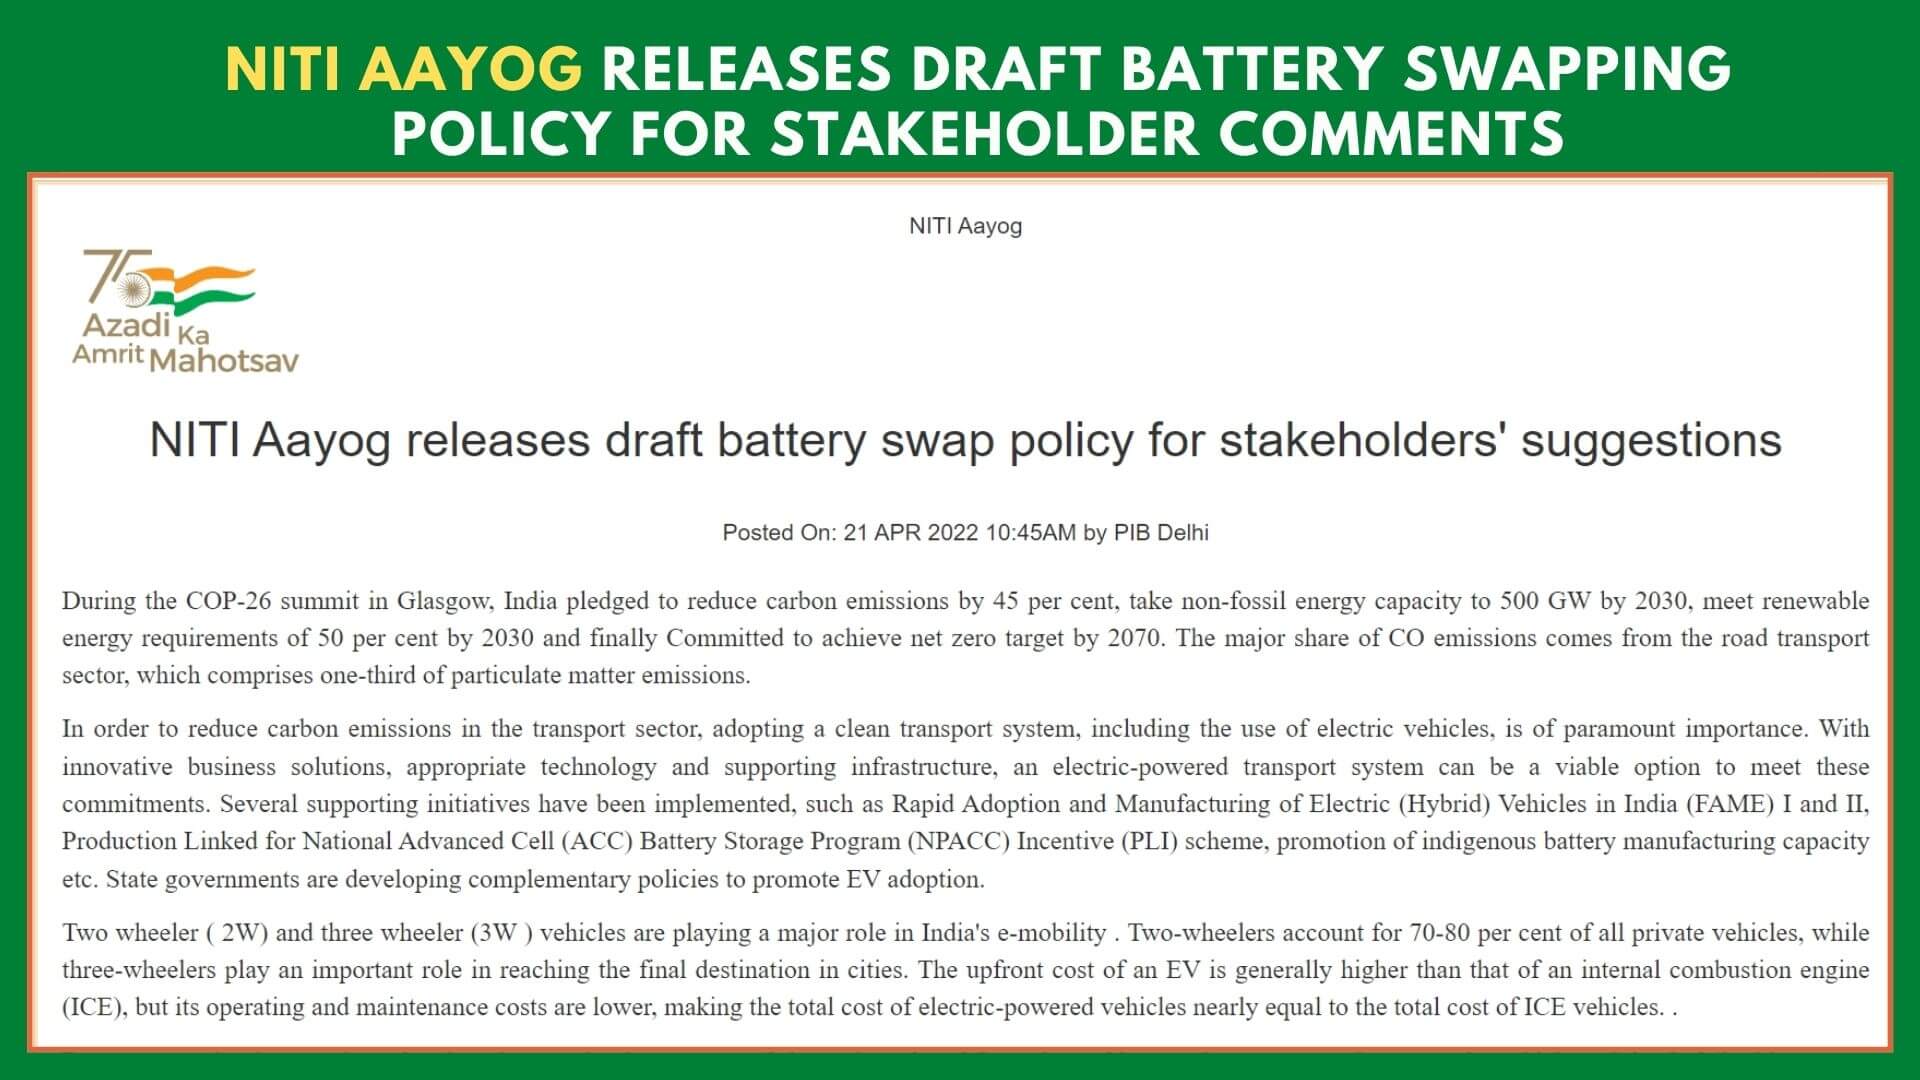 https://e-vehicleinfo.com/niti-aayog-releases-draft-battery-swapping-policy-for-stakeholder/